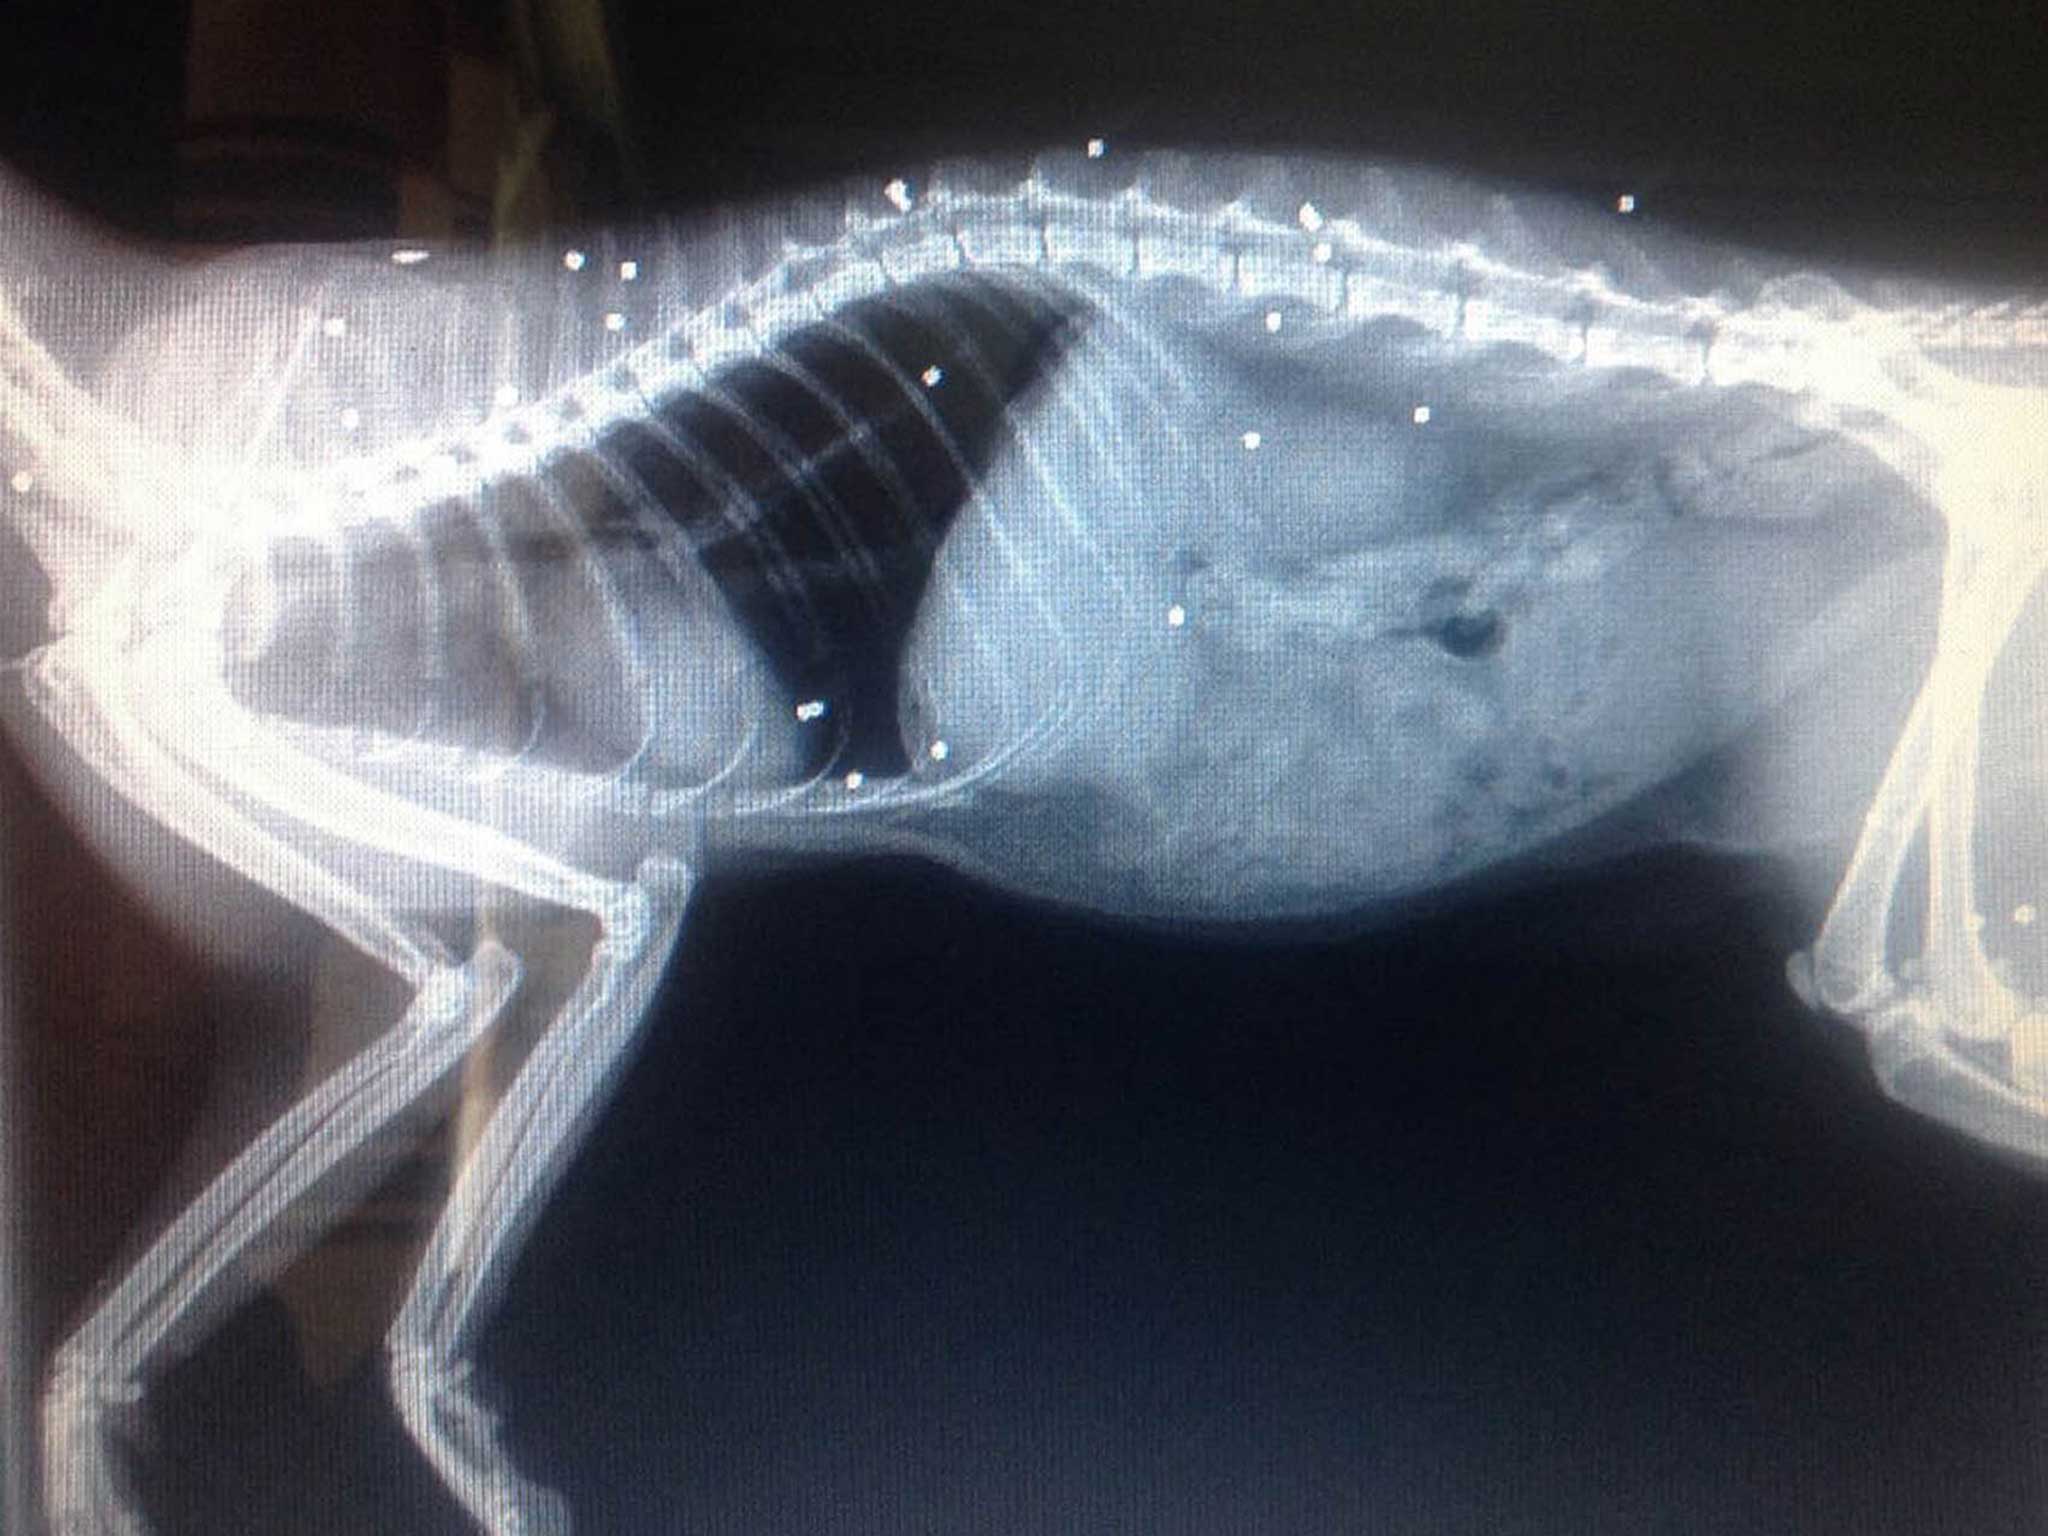 An x-ray of Puss-Puss, who has made a "miraculous" recovery after suffering 30 separate shotgun wounds